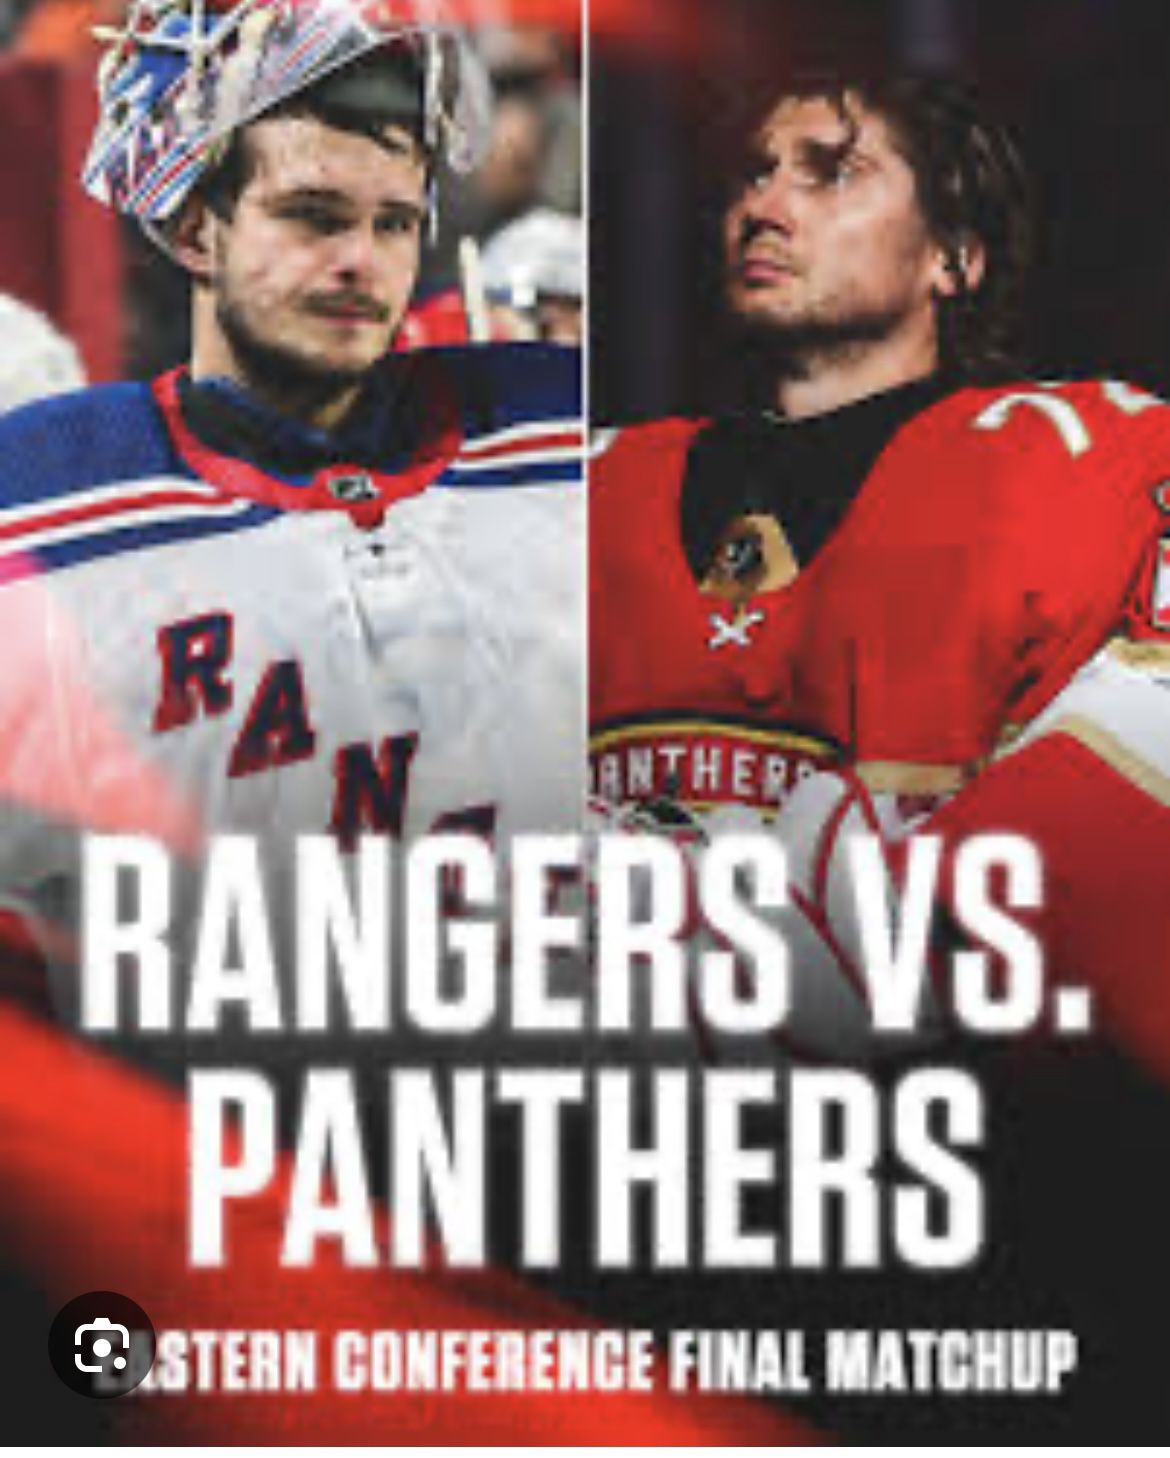 Florida Panthers v  New York Rangers Home Game #1